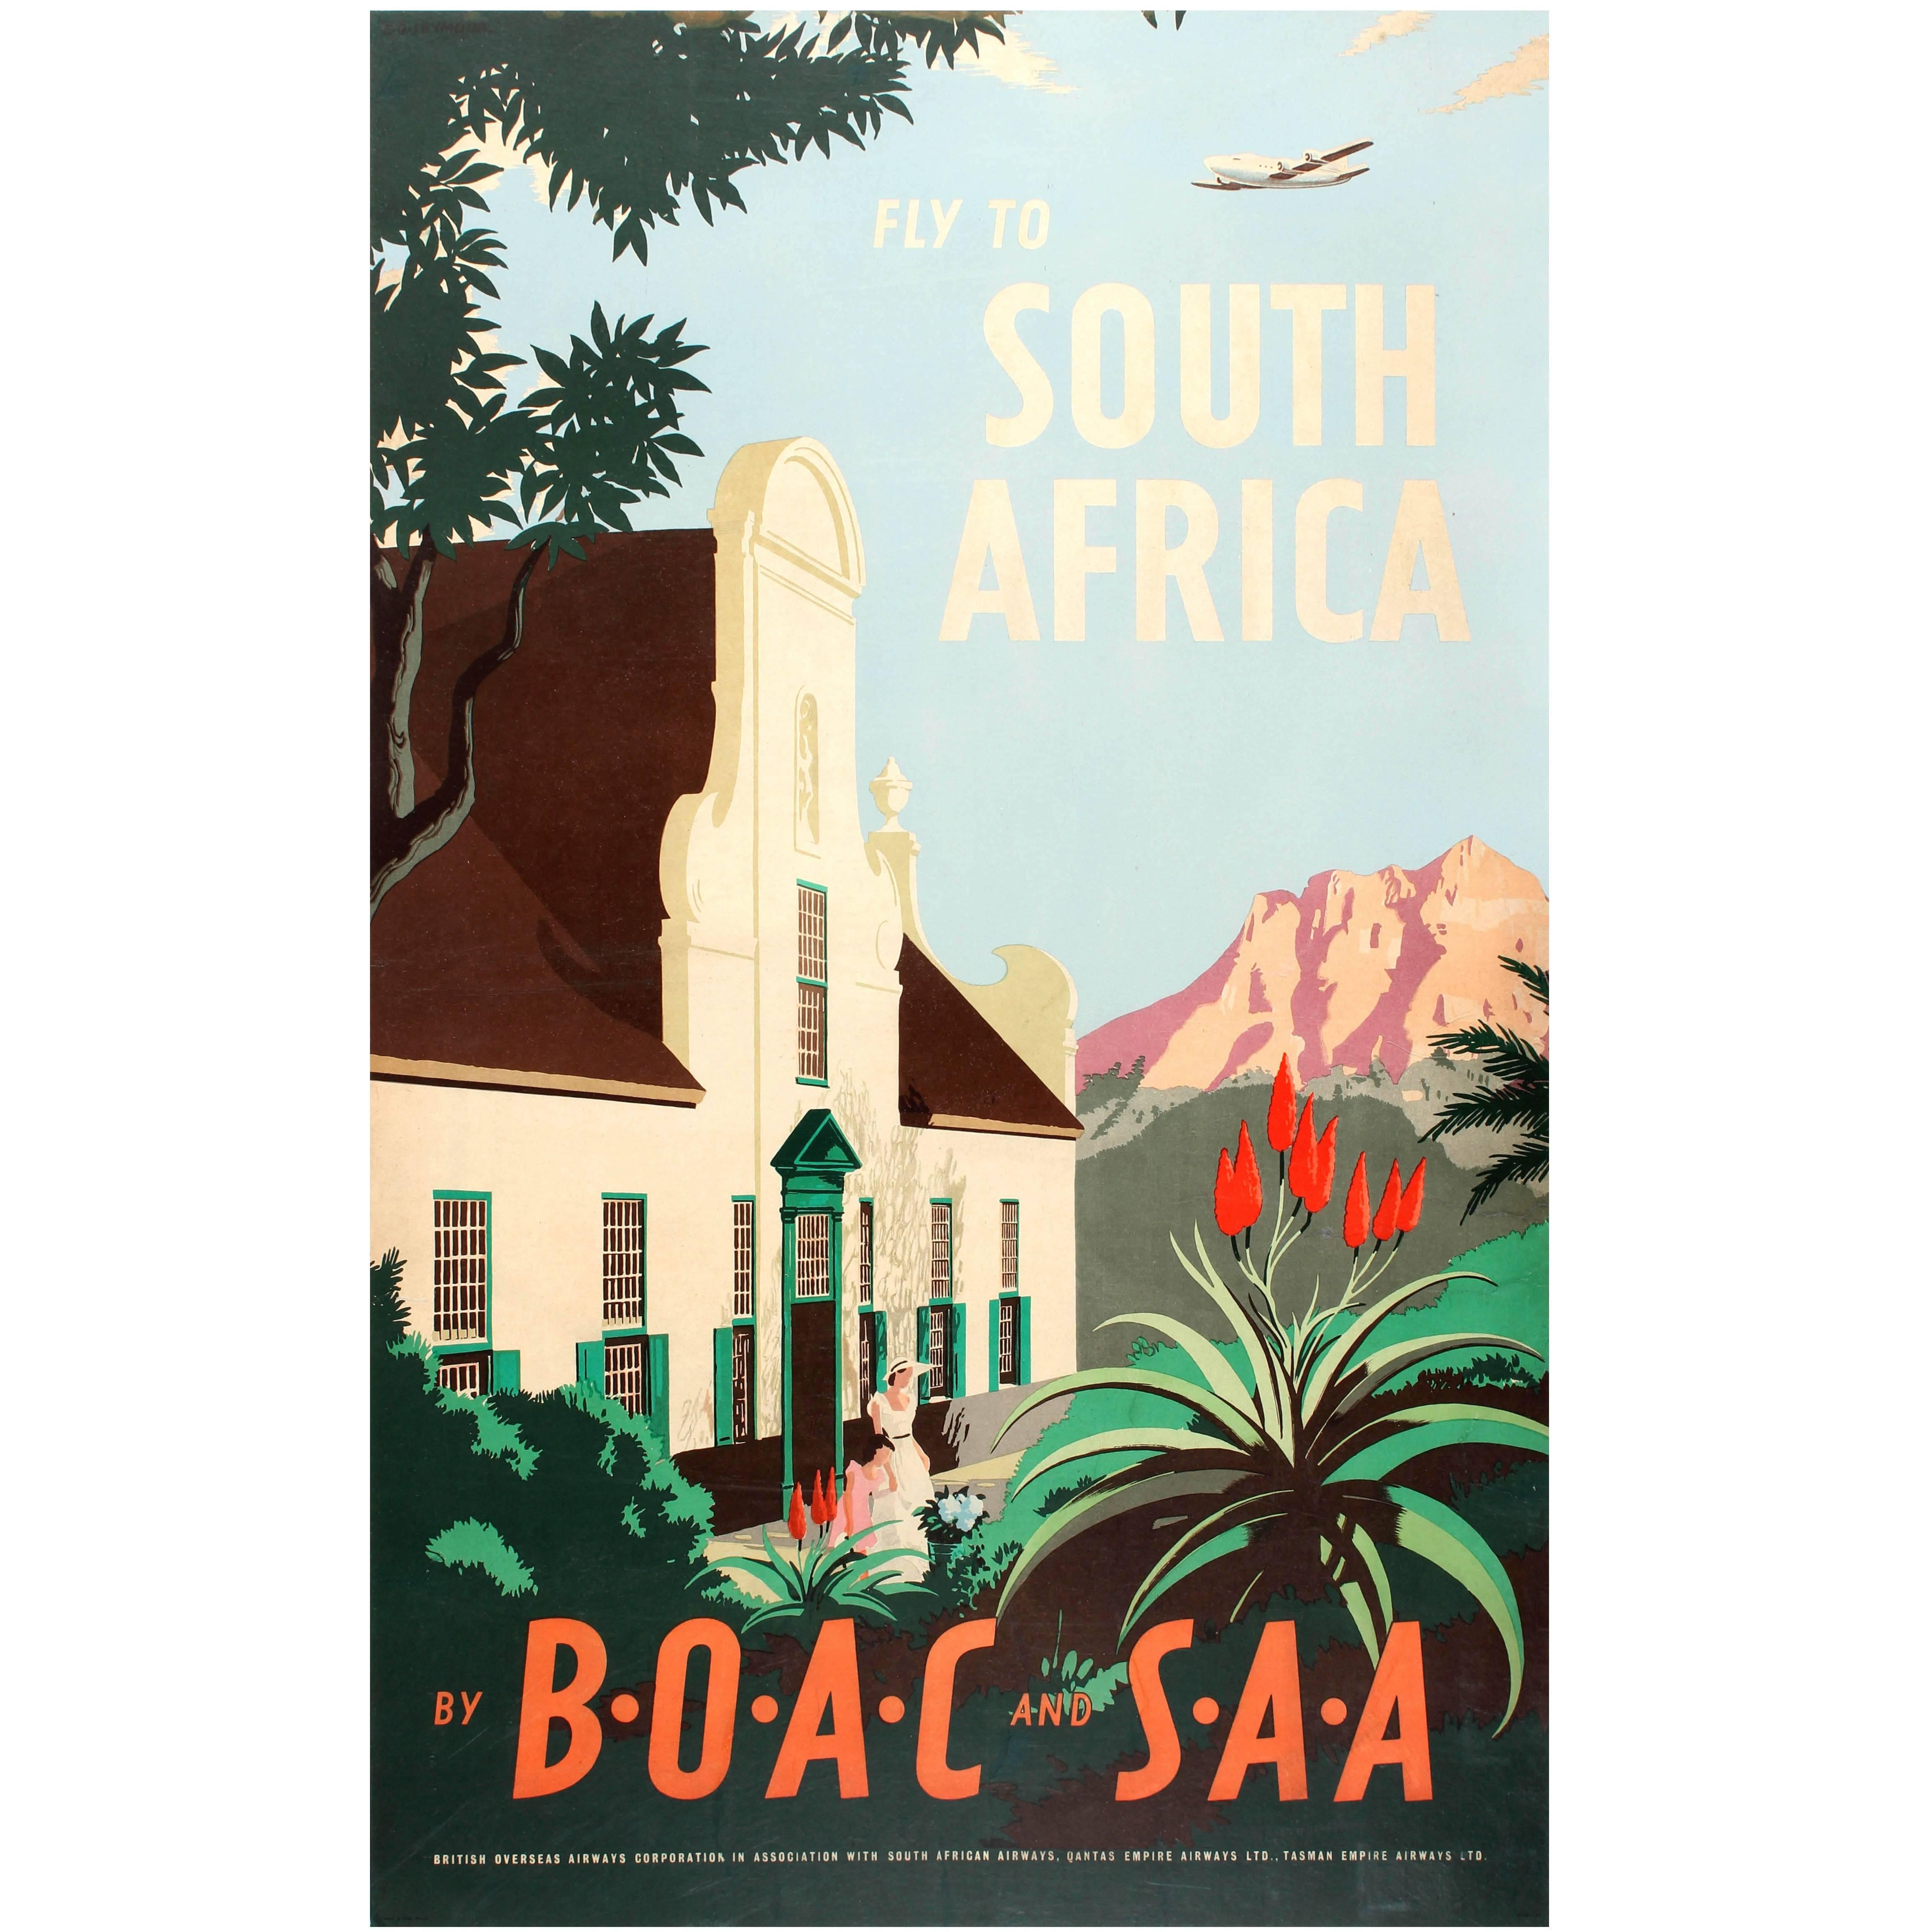 Original Vintage Travel Advertising Poster - Fly to South Africa by BOAC and SAA